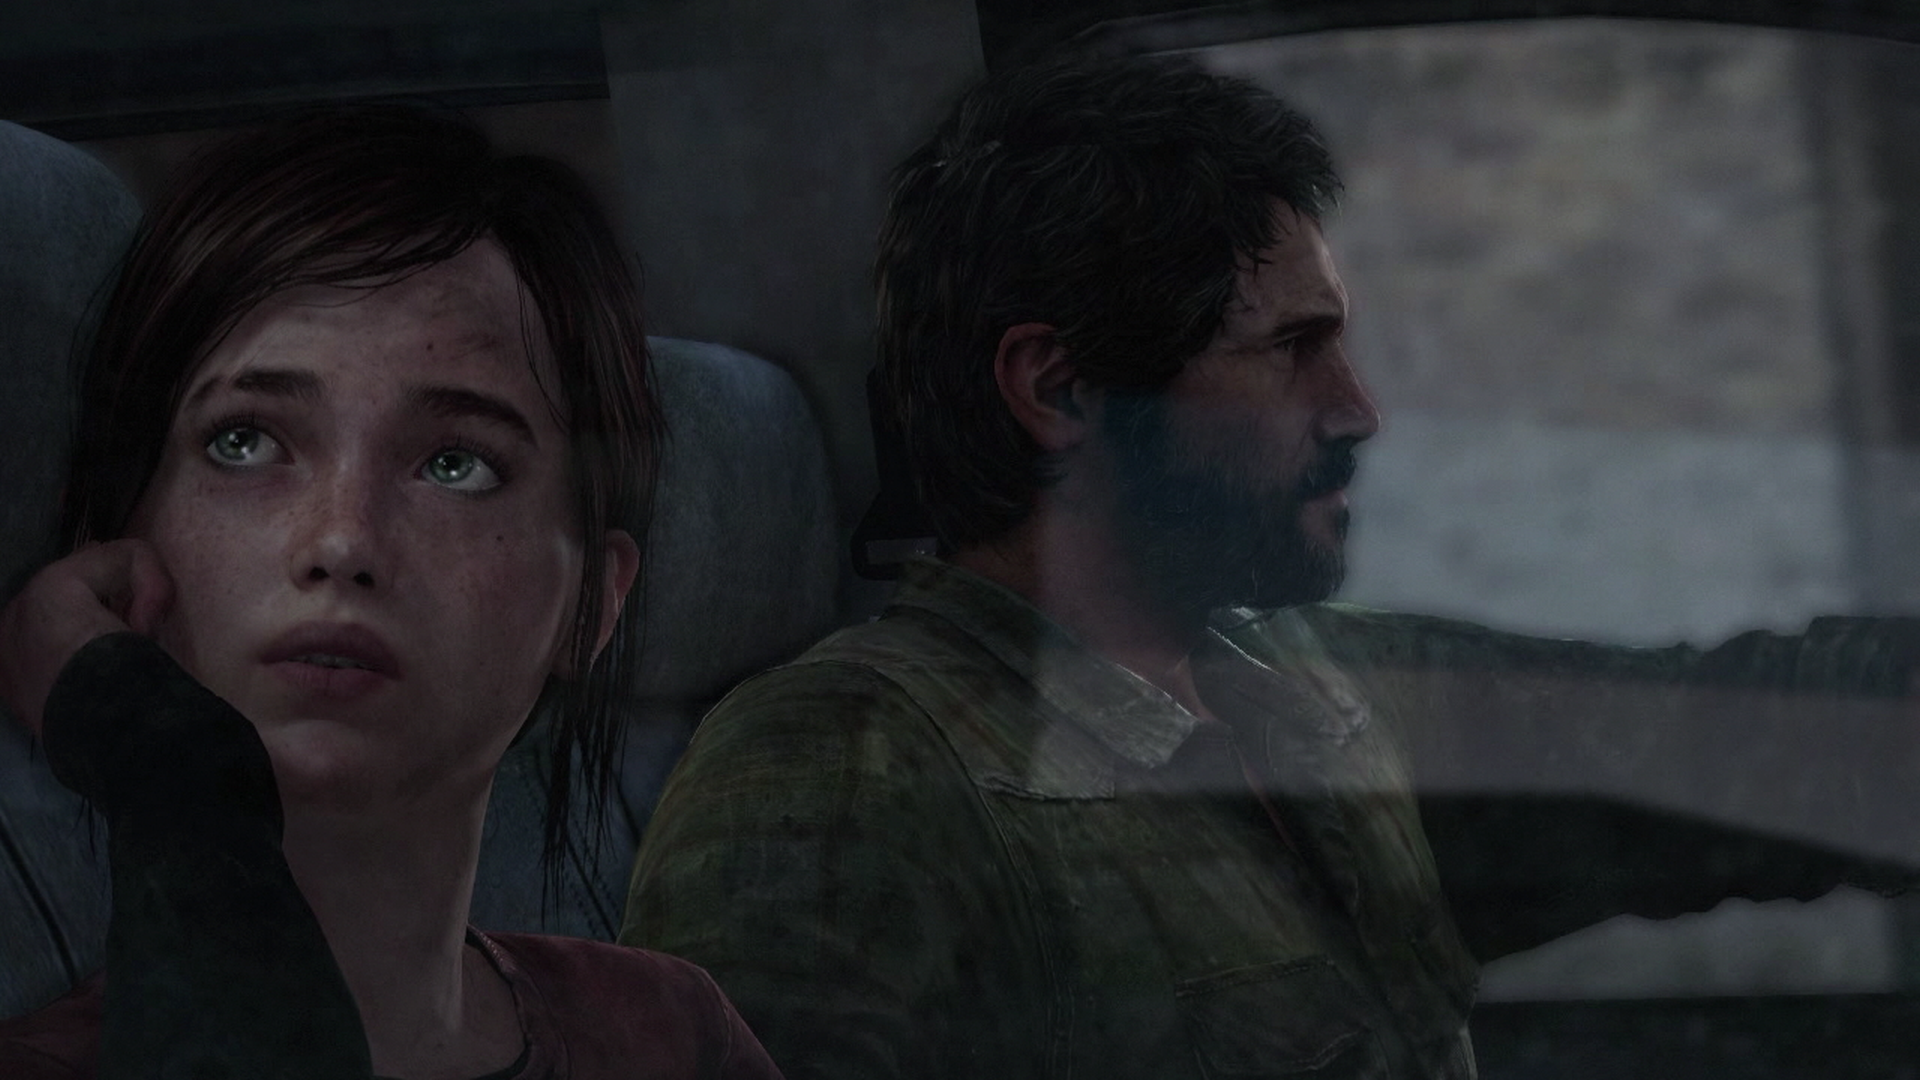 The Last Of Us Ps3 Vs Ps4 Comparison Spoilers Page 7 Neogaf 